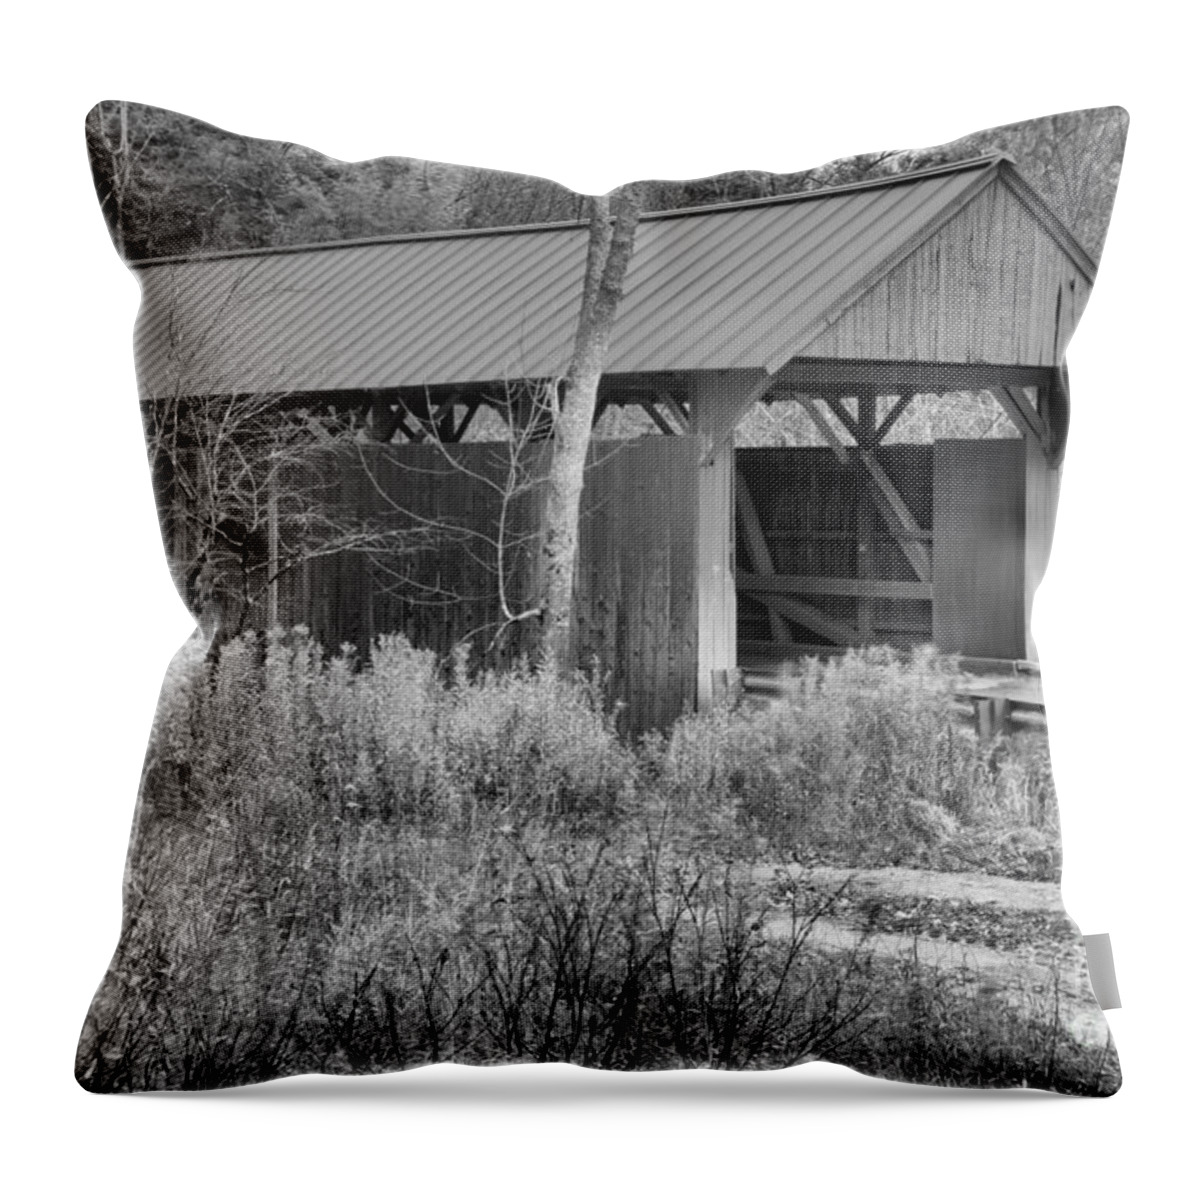 Red Covered Bridge Throw Pillow featuring the photograph Red Covered Bridge In The Brush Black And White by Adam Jewell